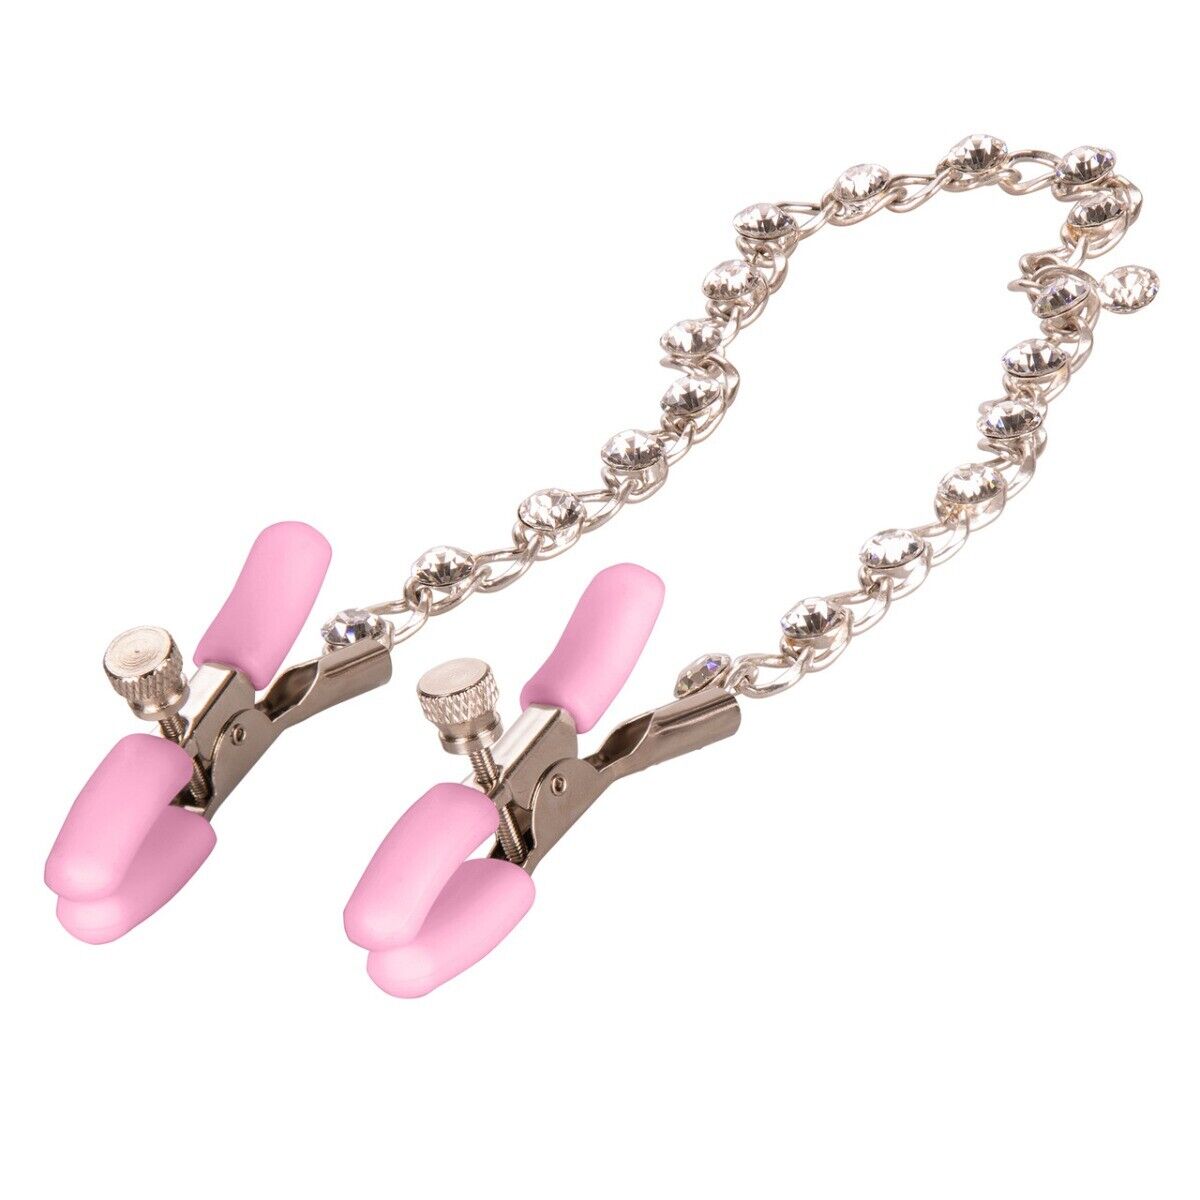 Nipple Play PinkCrystal Chain Nipple Clamps Couple Lover SM Bondage Sex Toys